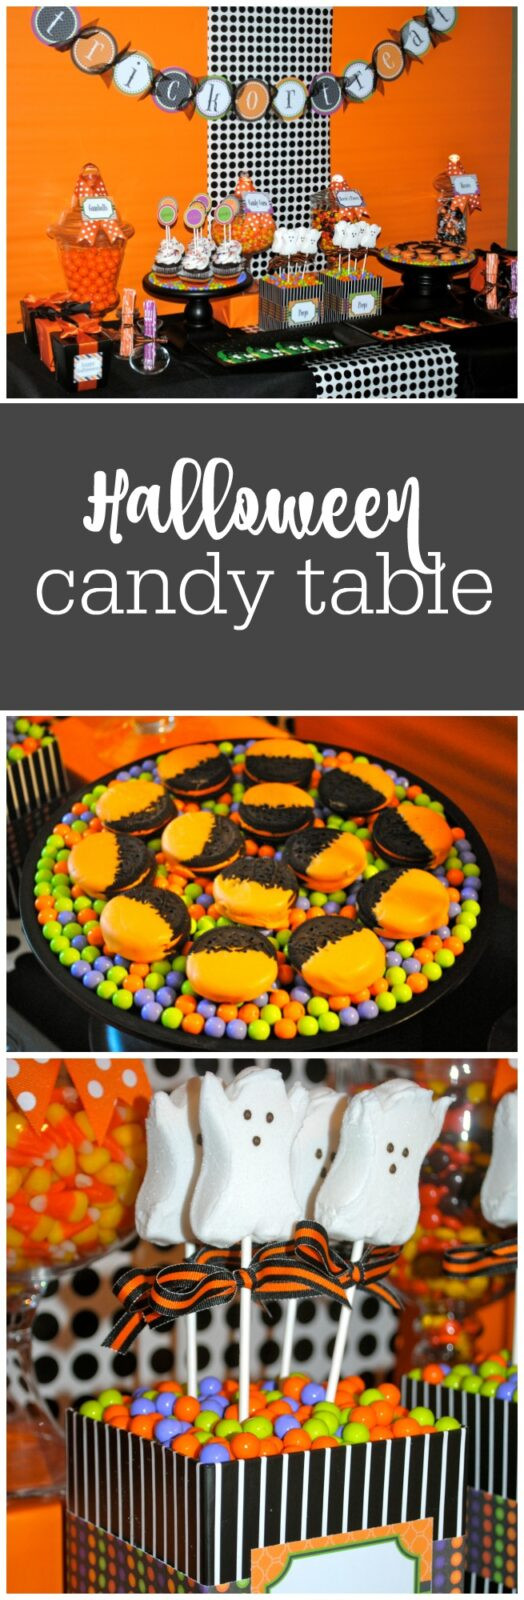 Halloween Candy Table
 My Parties Sweet Not Spooky Halloween Party Part 1